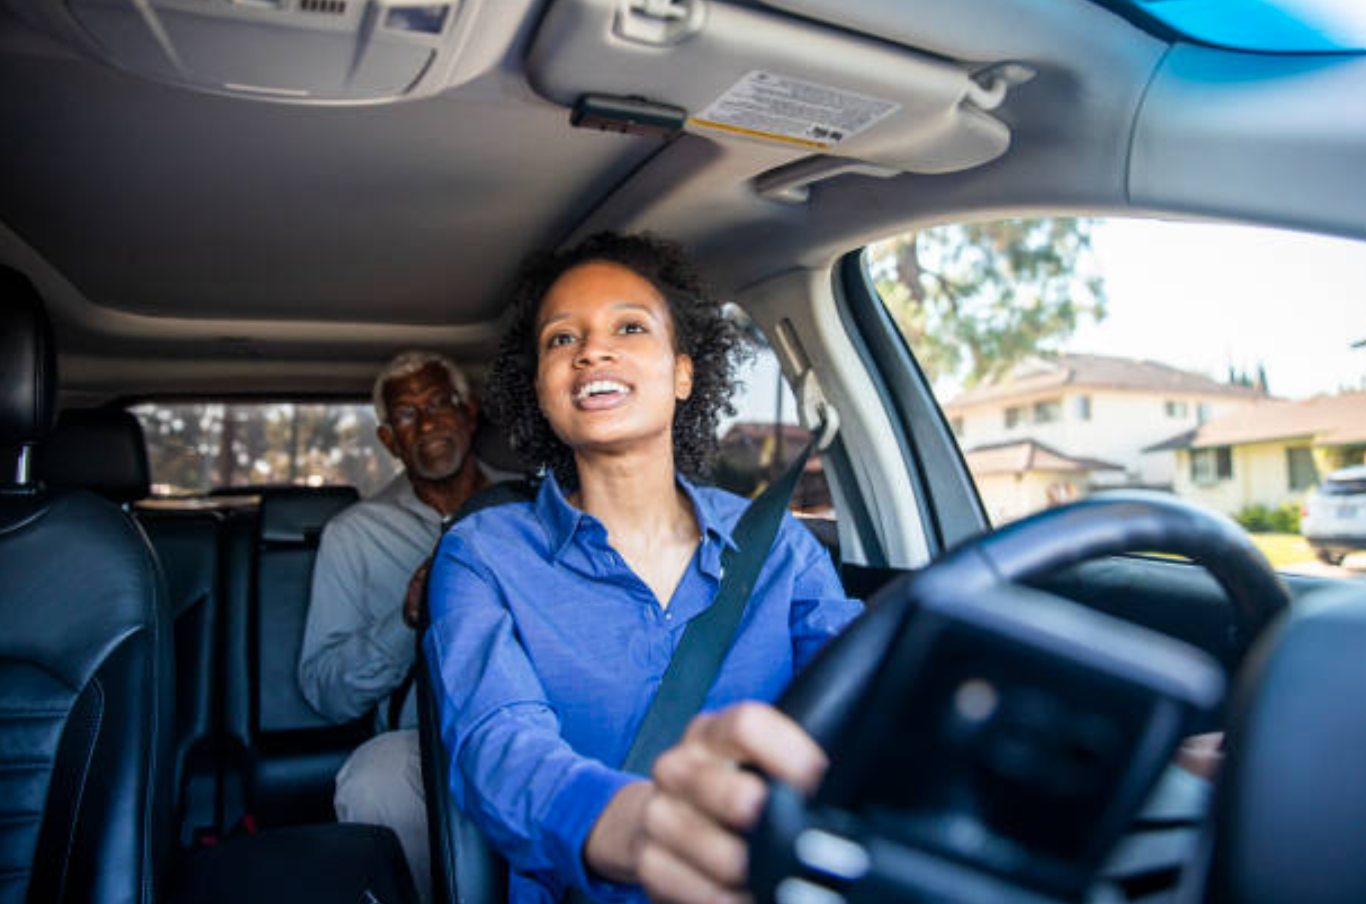 A young black woman drives a passenger in her car as a professional driver; image by adamkaz, via iStockphoto.com.